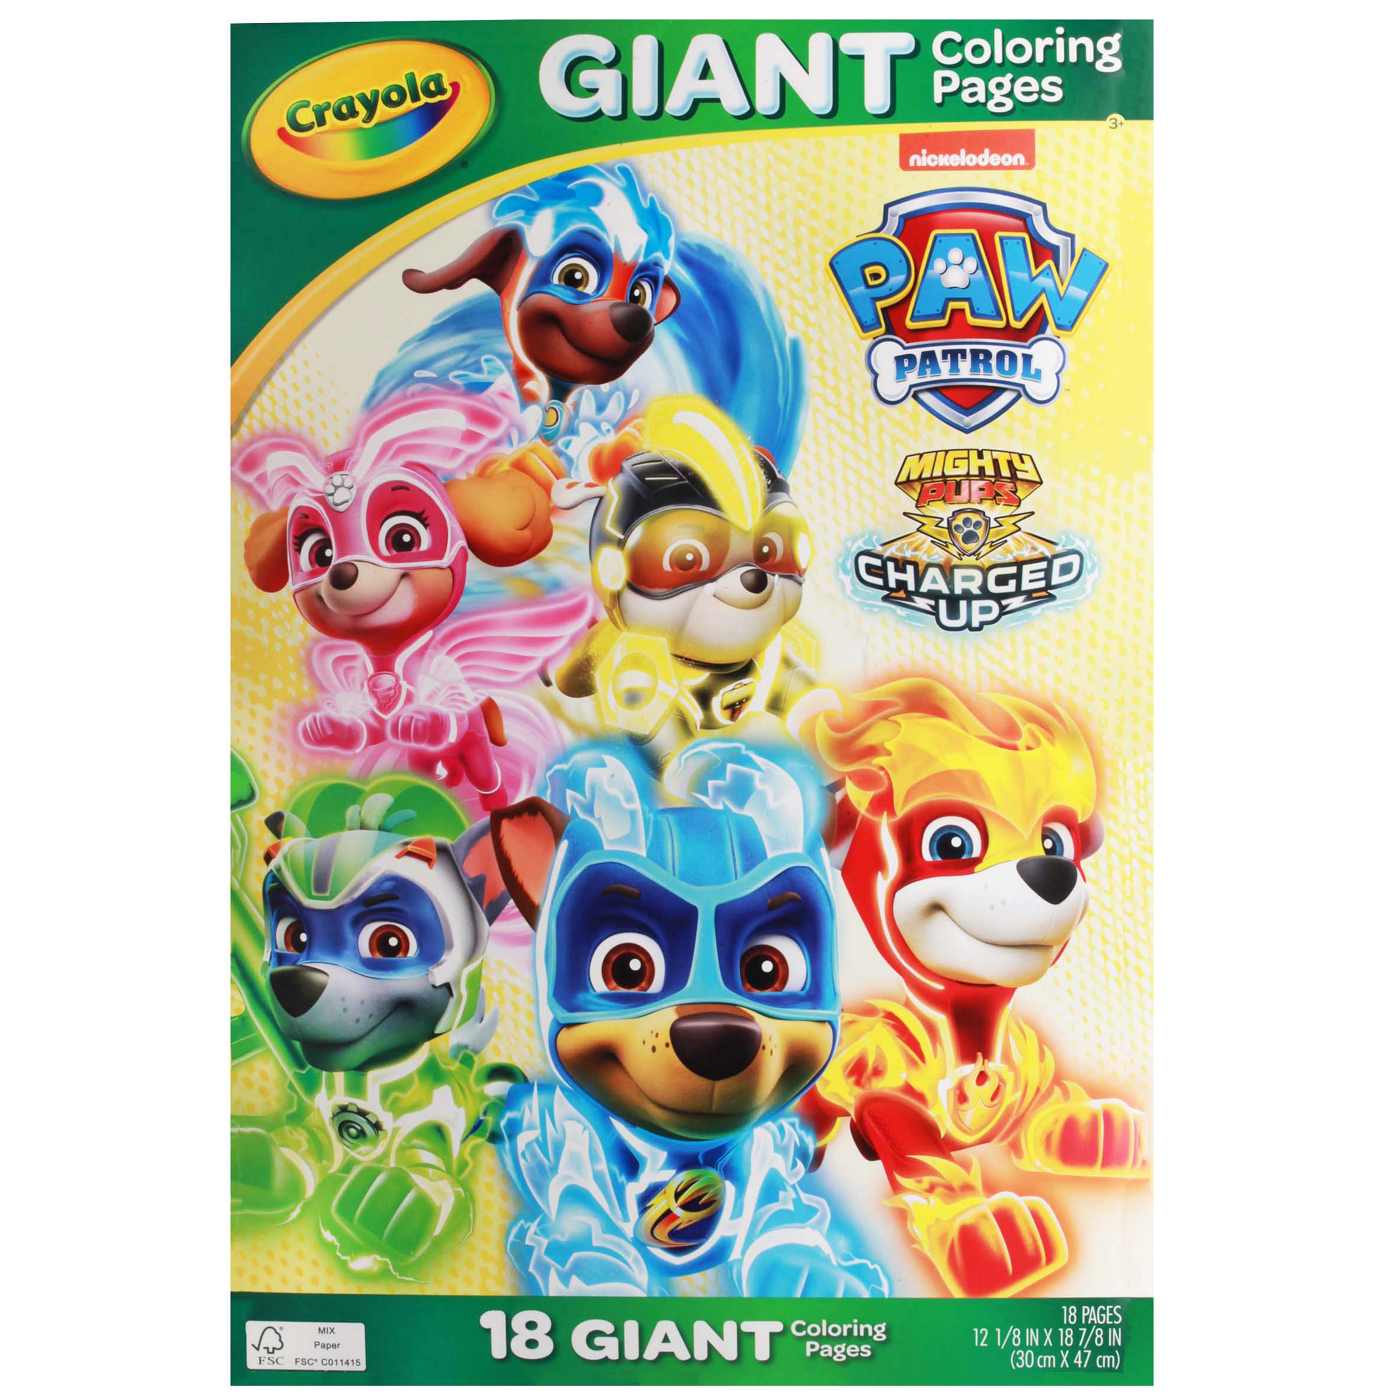 Crayola Giant Coloring Pages – Paw Patrol - Shop Books & Coloring at H-E-B